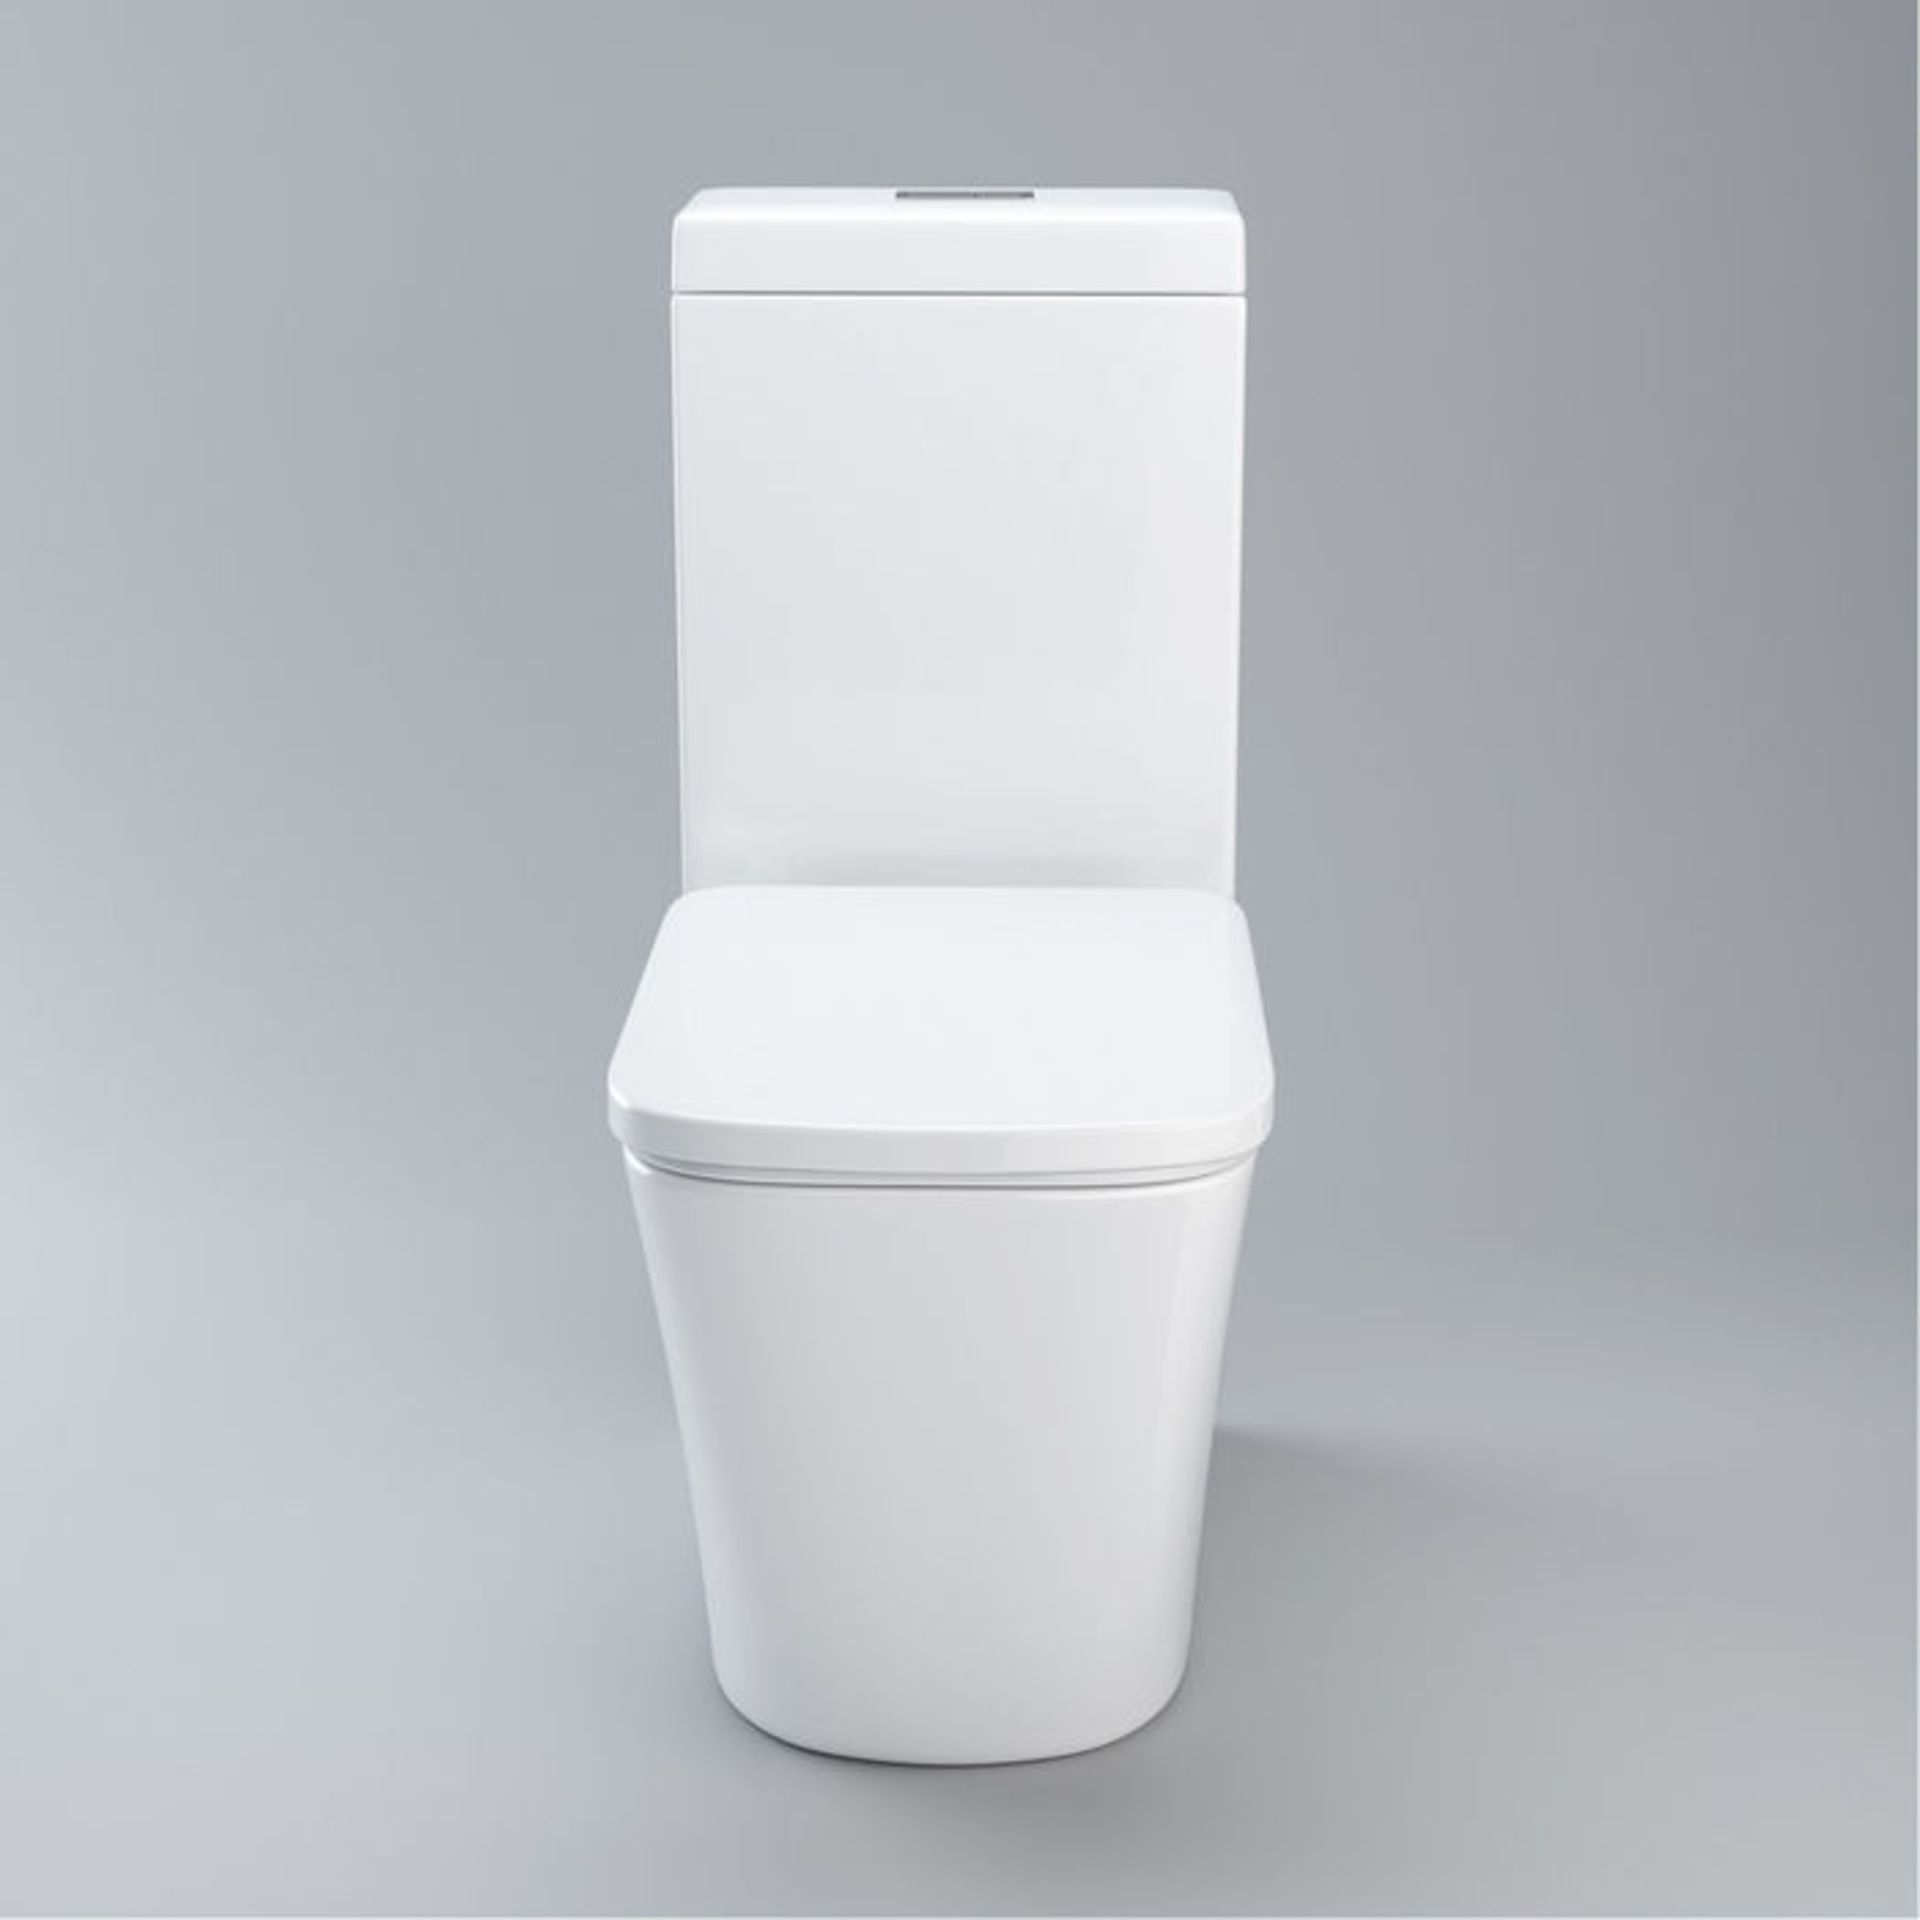 (H77) Florence Close Coupled Toilet & Cistern inc Soft Close Seat. Contemporary design finished in a - Image 3 of 3